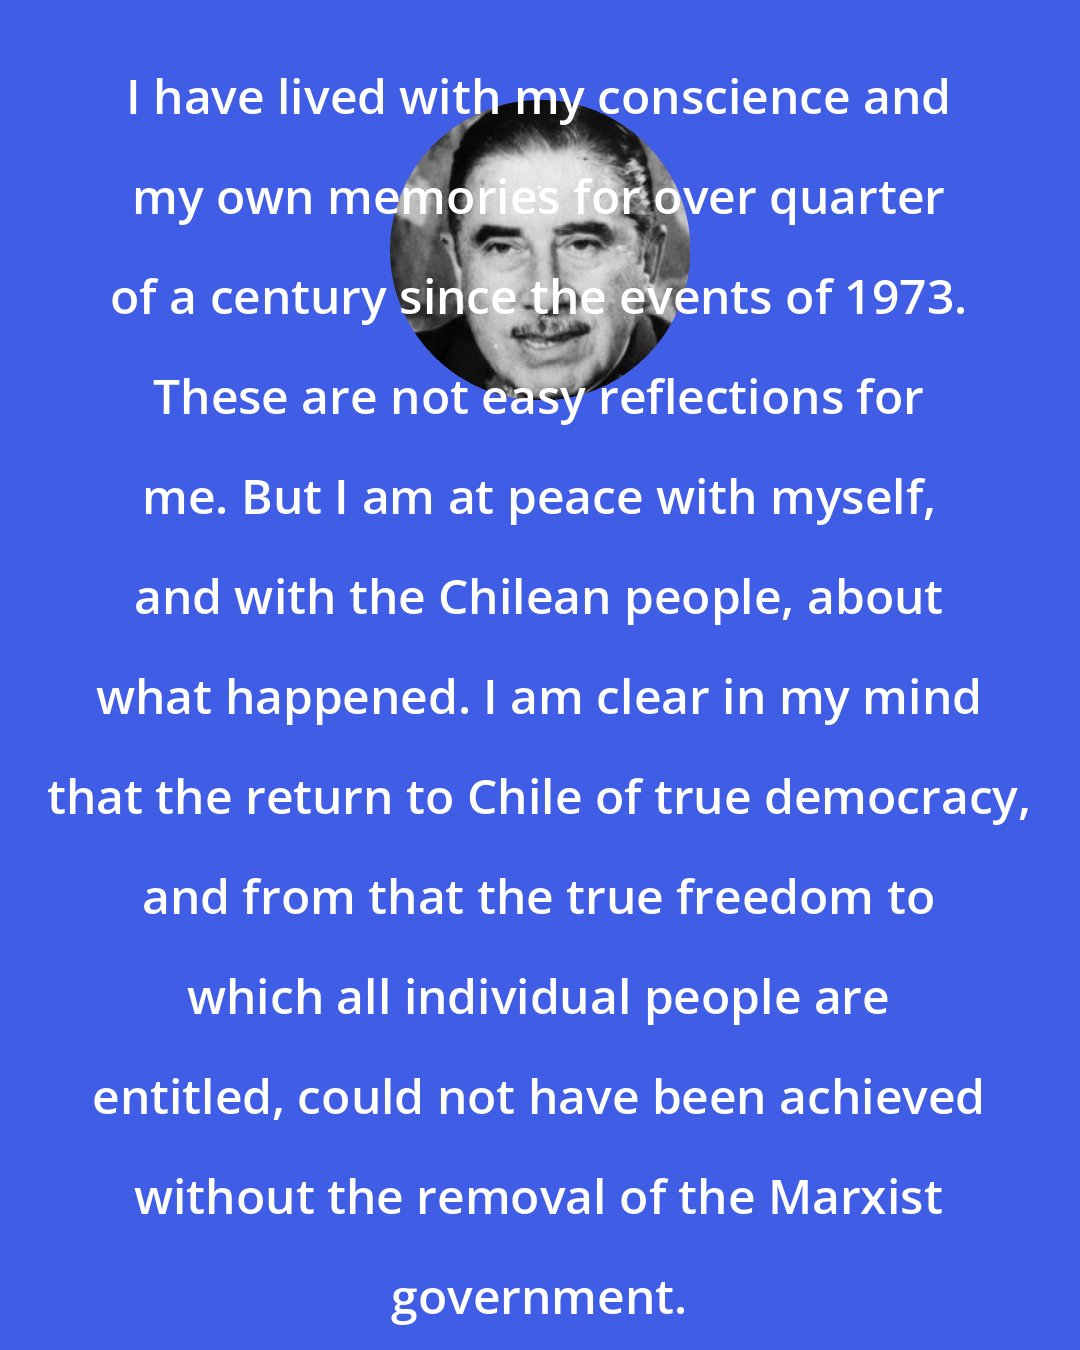 Augusto Pinochet: I have lived with my conscience and my own memories for over quarter of a century since the events of 1973. These are not easy reflections for me. But I am at peace with myself, and with the Chilean people, about what happened. I am clear in my mind that the return to Chile of true democracy, and from that the true freedom to which all individual people are entitled, could not have been achieved without the removal of the Marxist government.